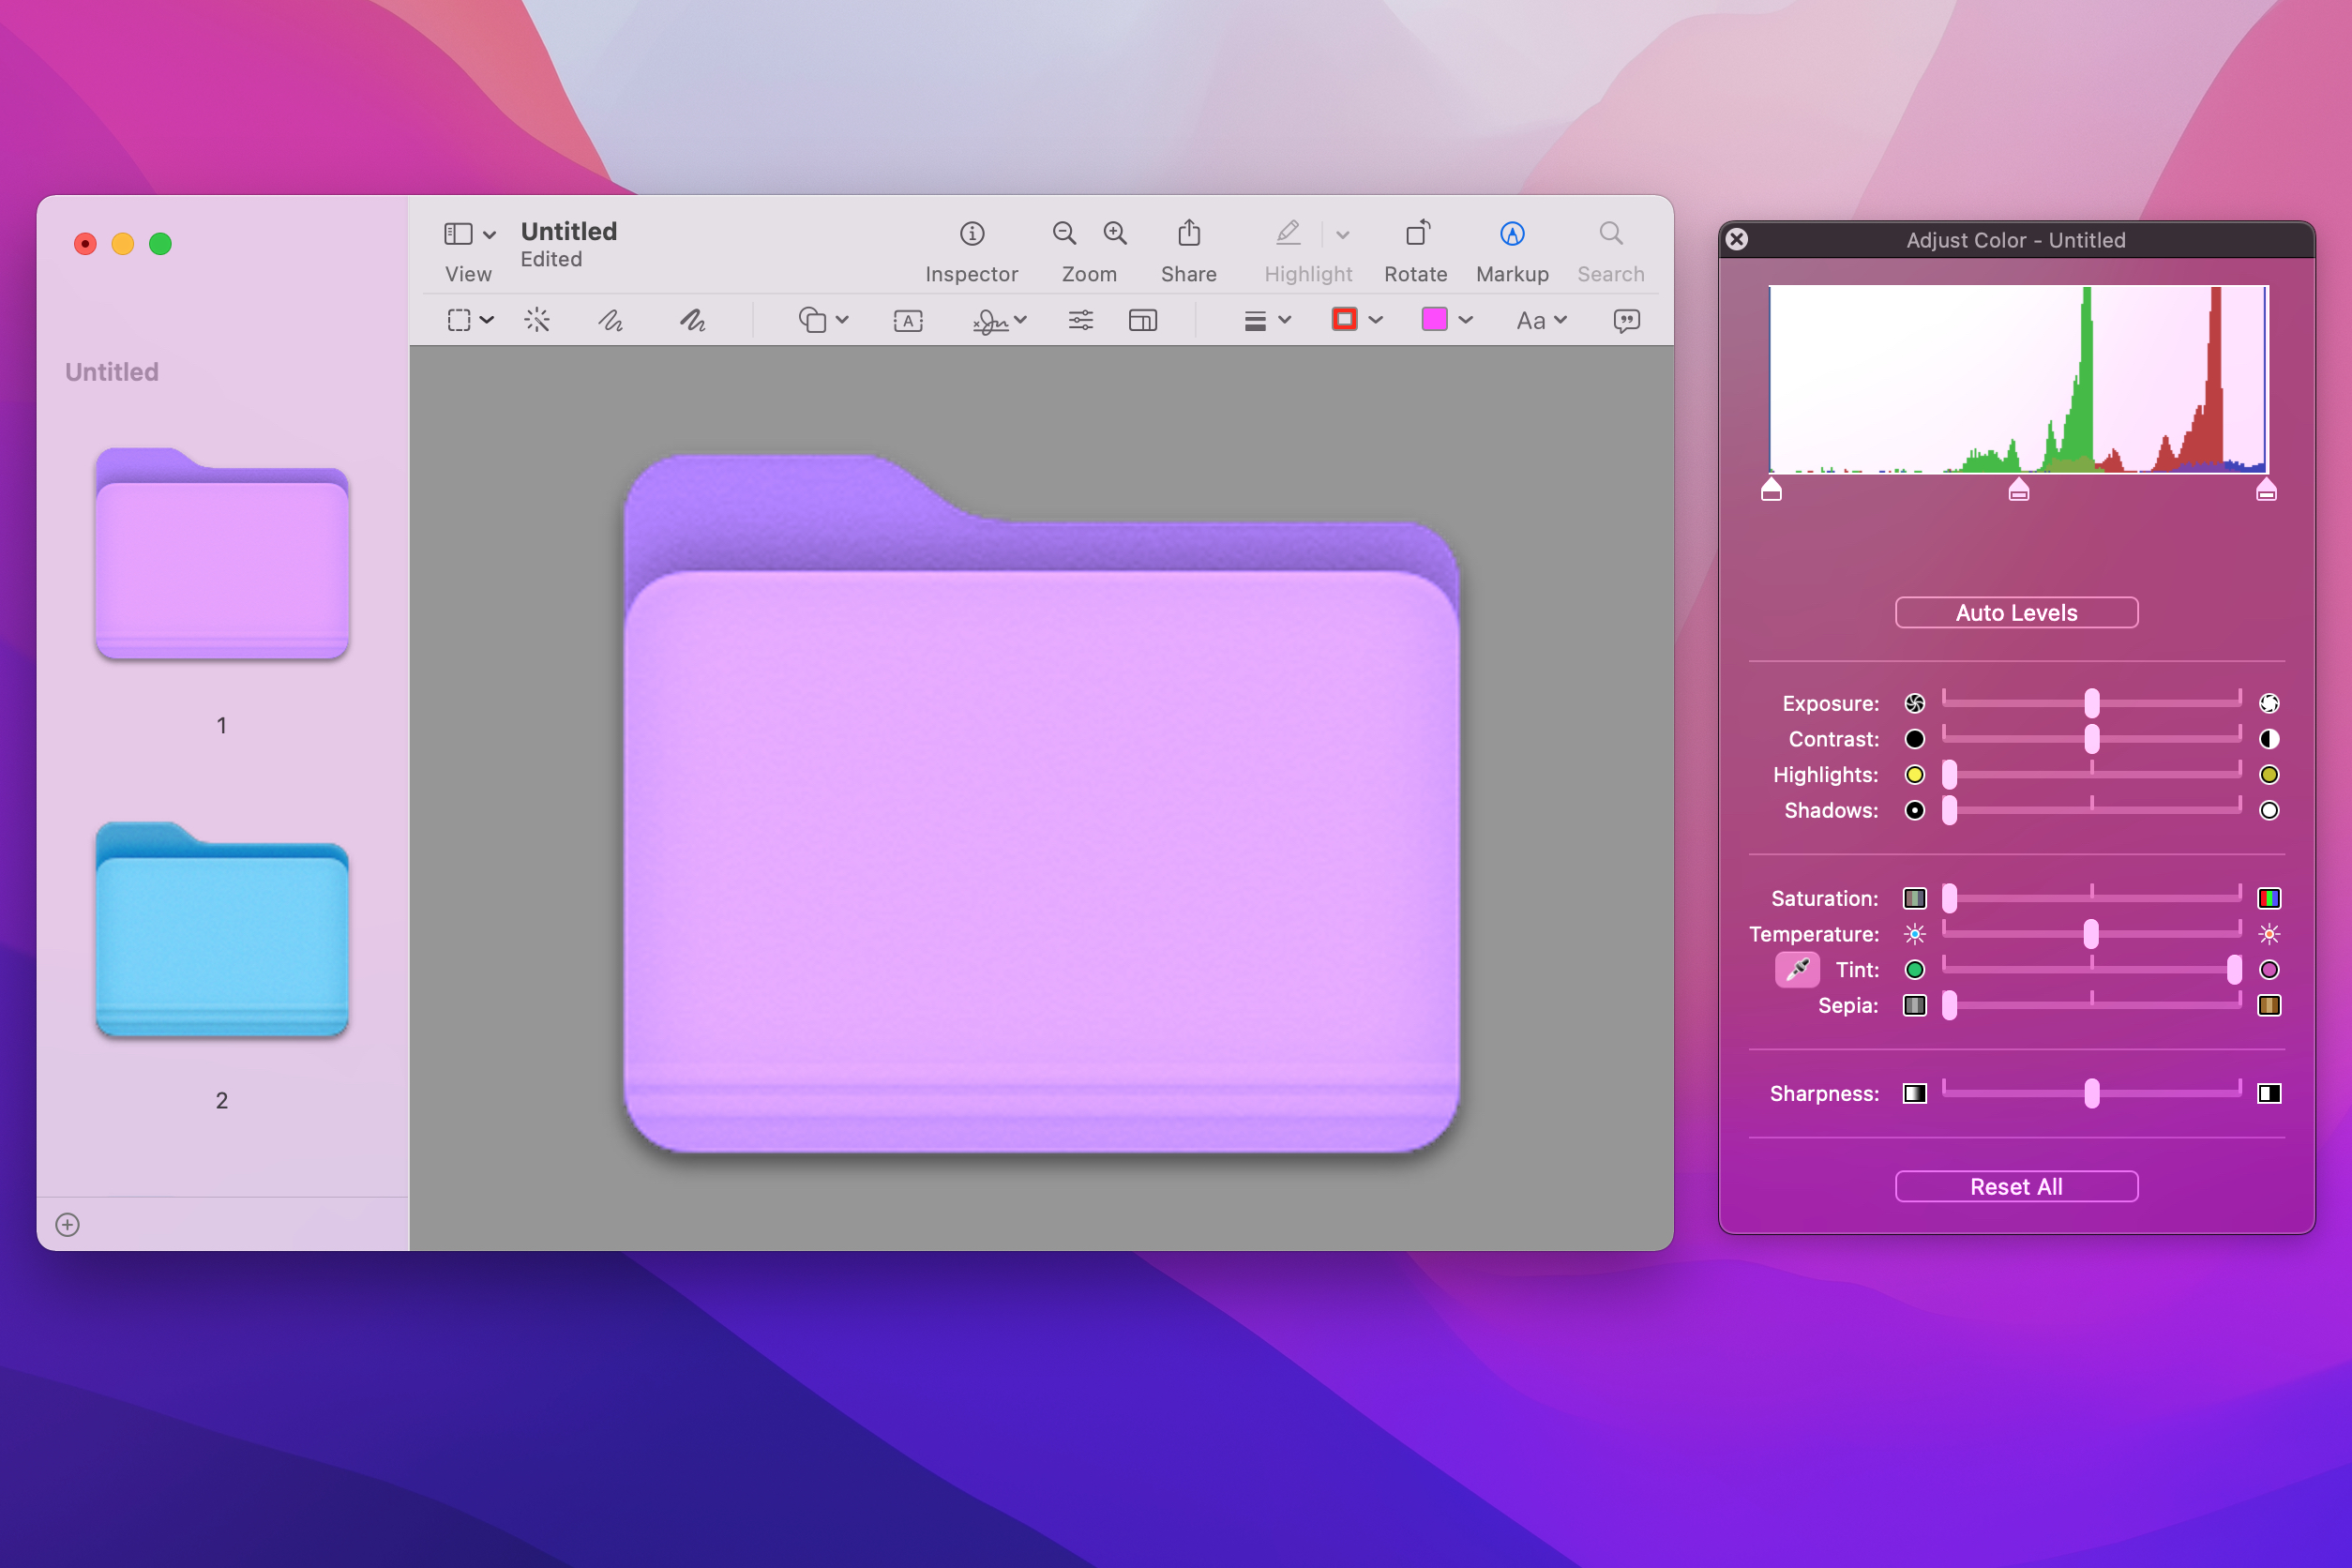 Highlight, adjust color, and use the hue slider in the preview.